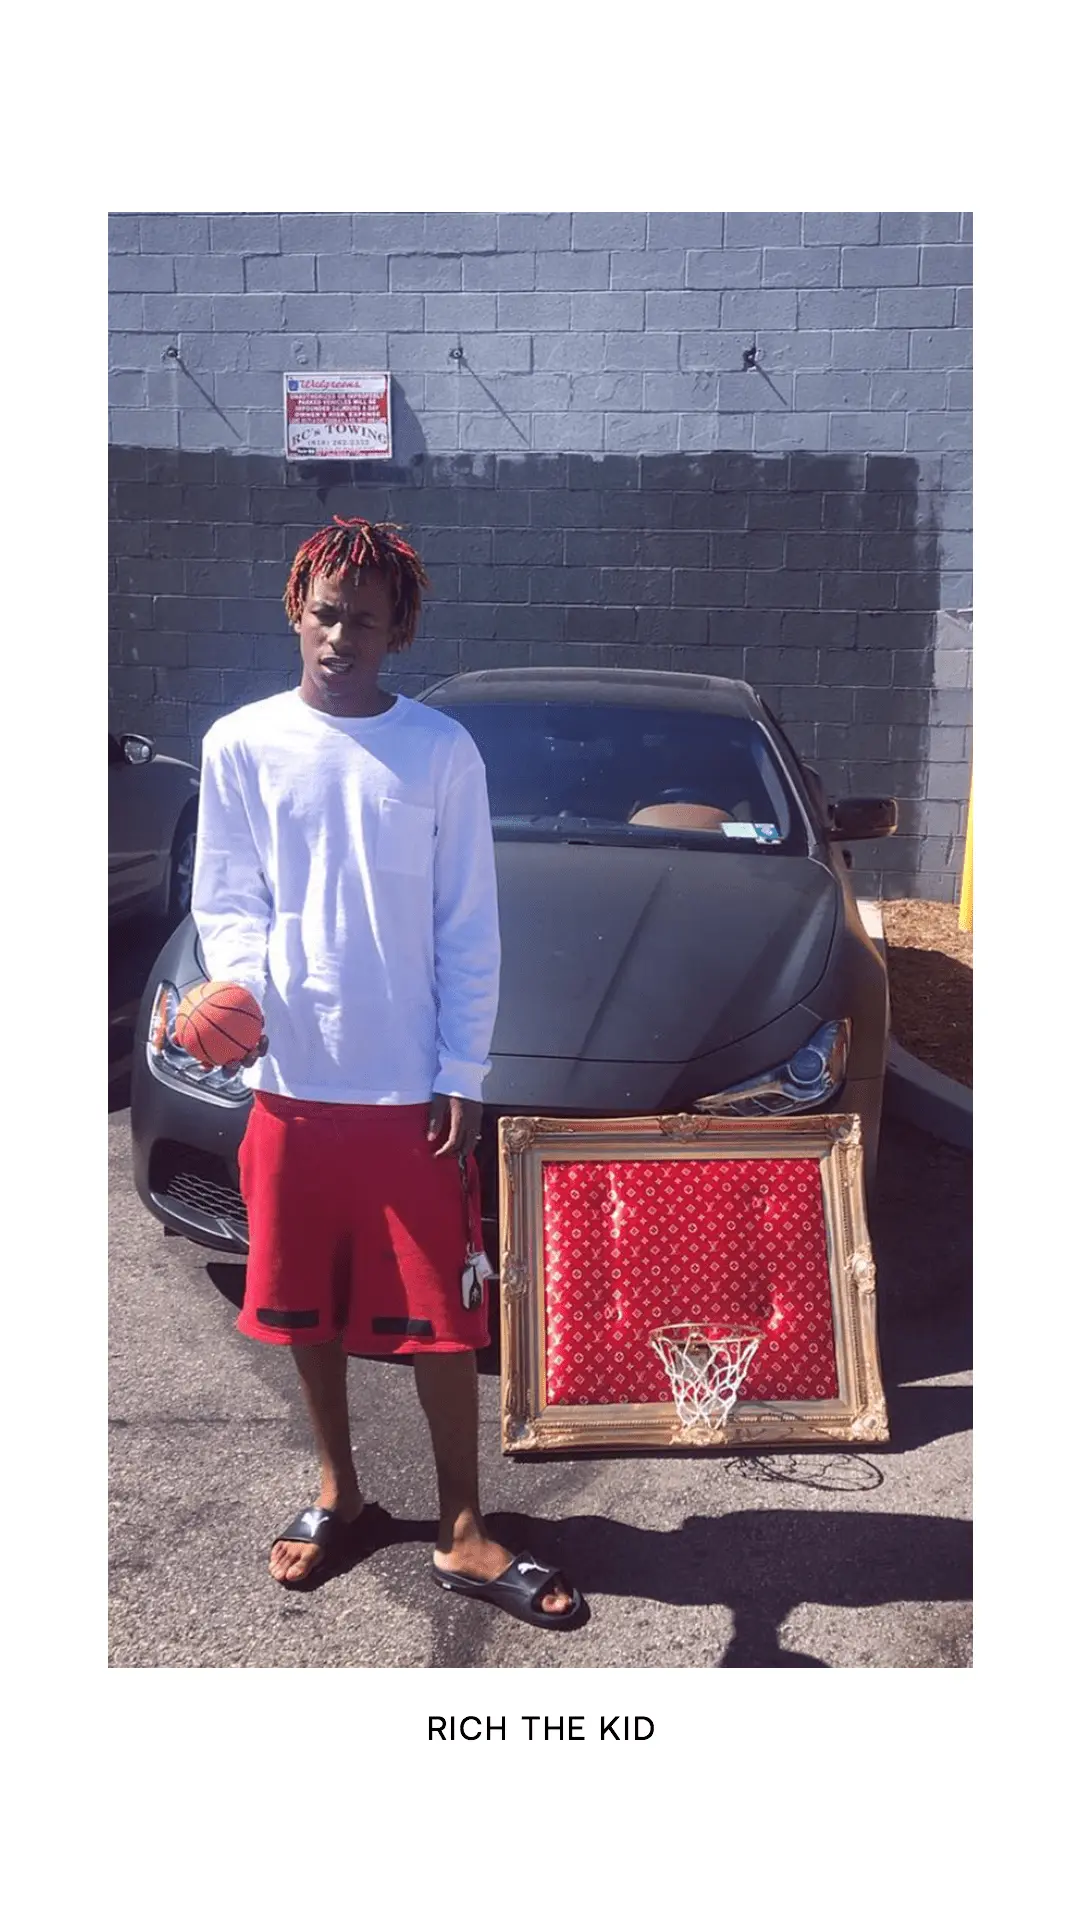 A man standing next to a car with a basketball hoop.